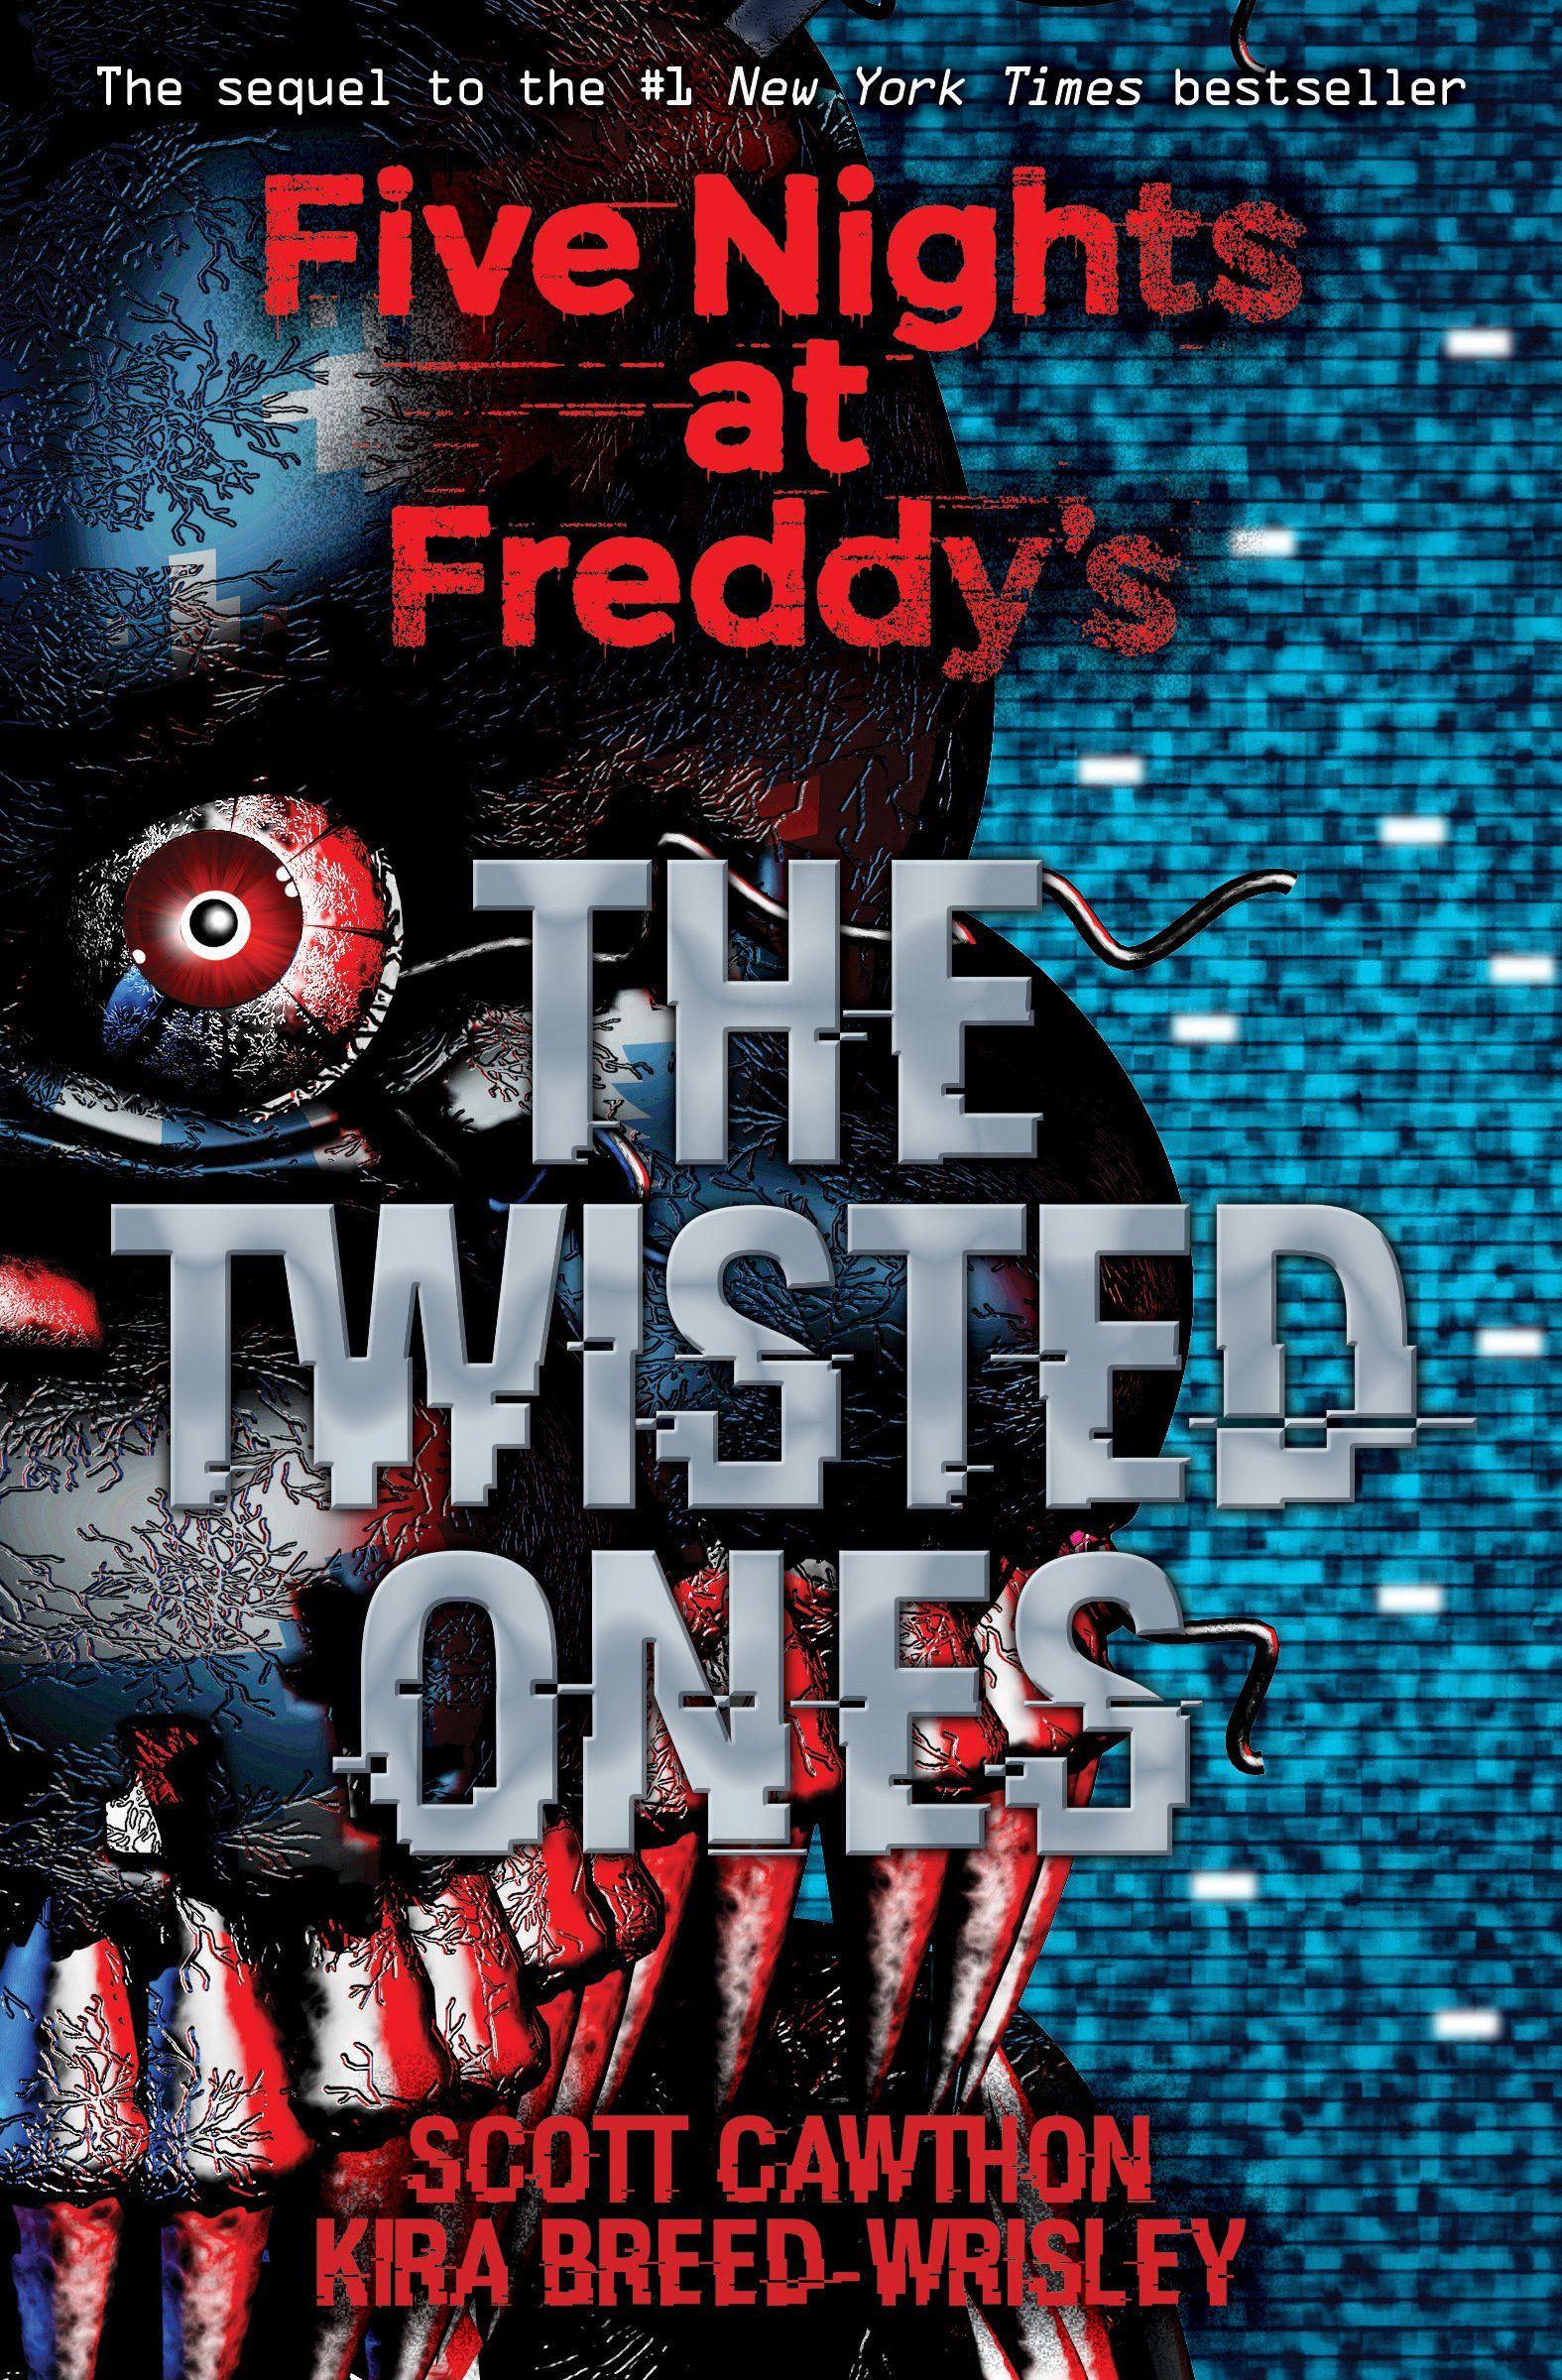 Five Nights at Freddy's: The Twisted Ones: Amazon.co.uk: Scott